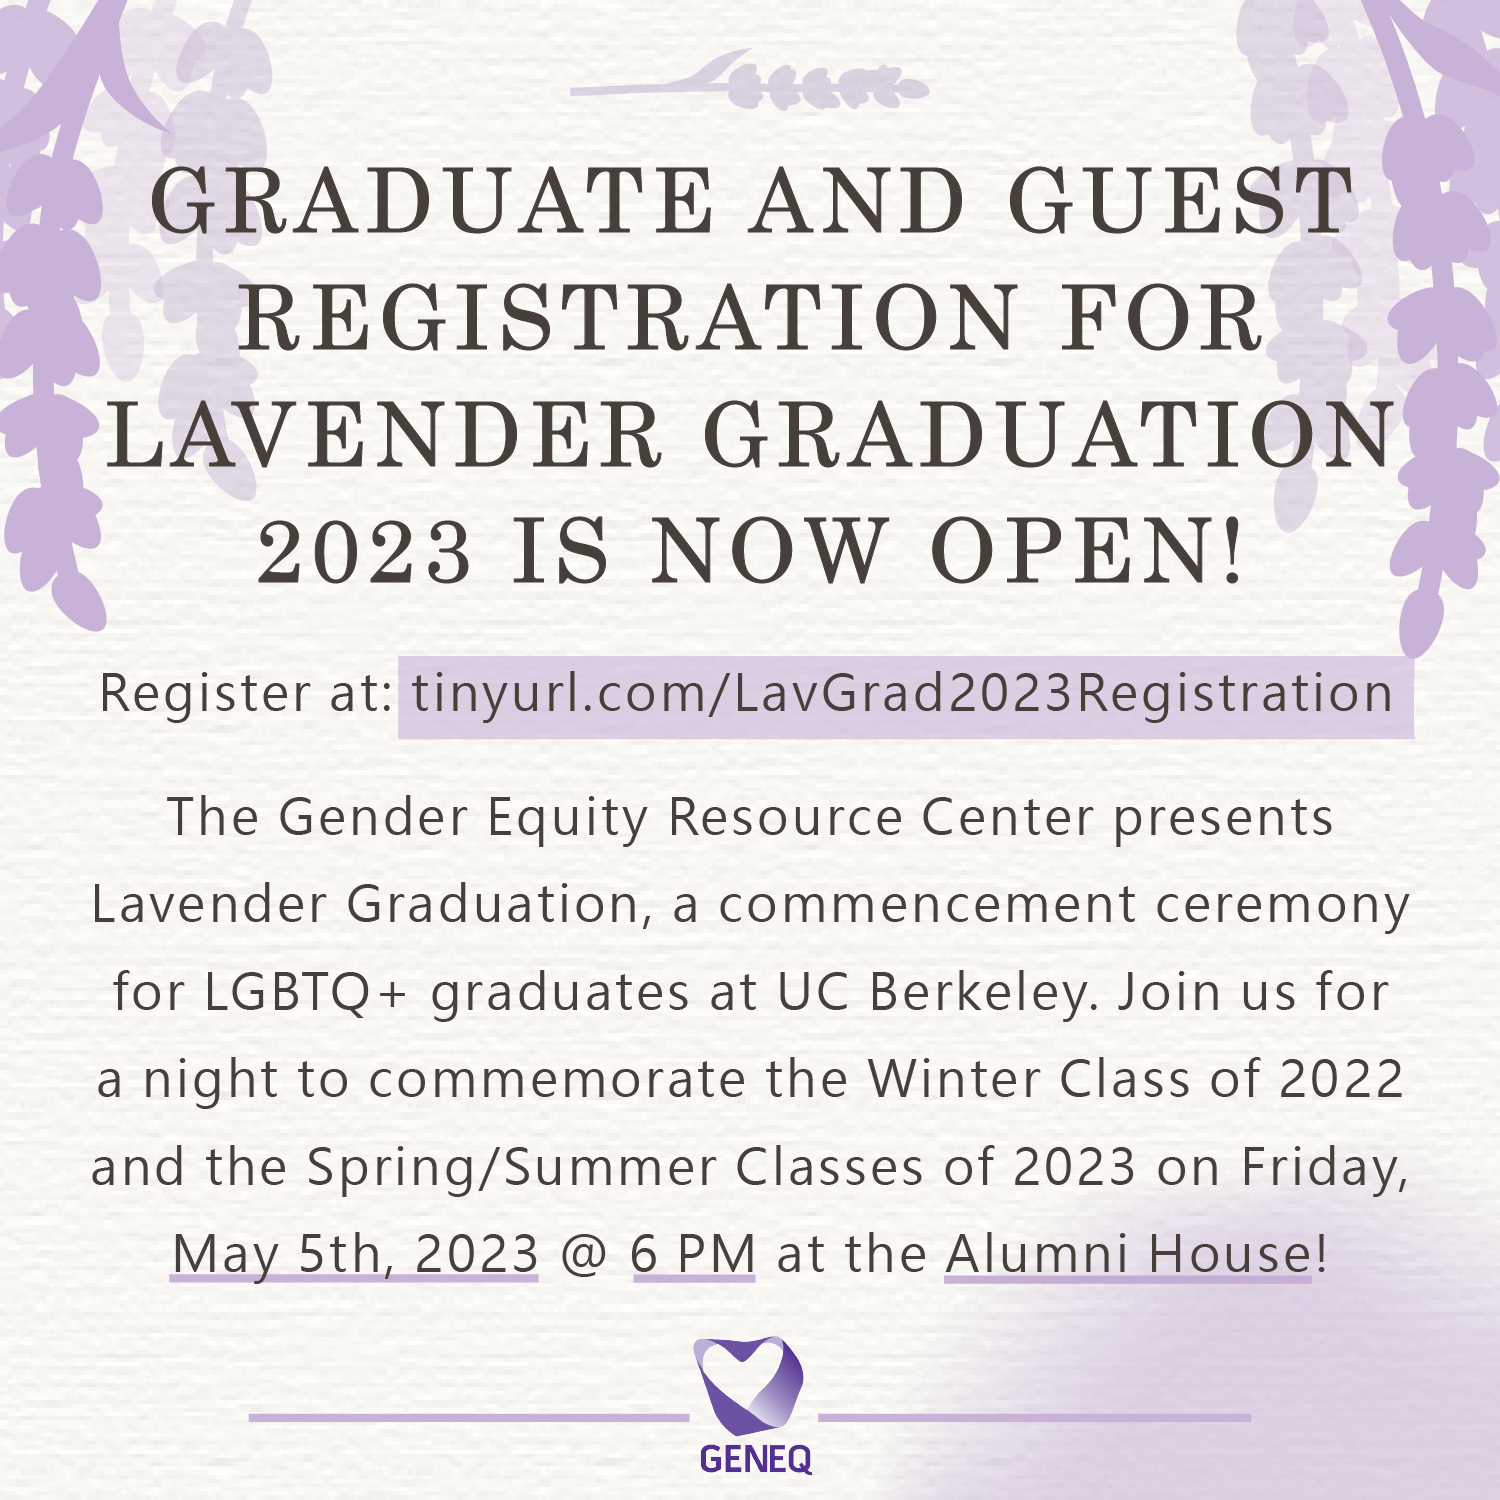 GRADUATE AND GUEST REGISTRATION FOR LAVENDER GRADUATION 2023 IS NOW OPEN!